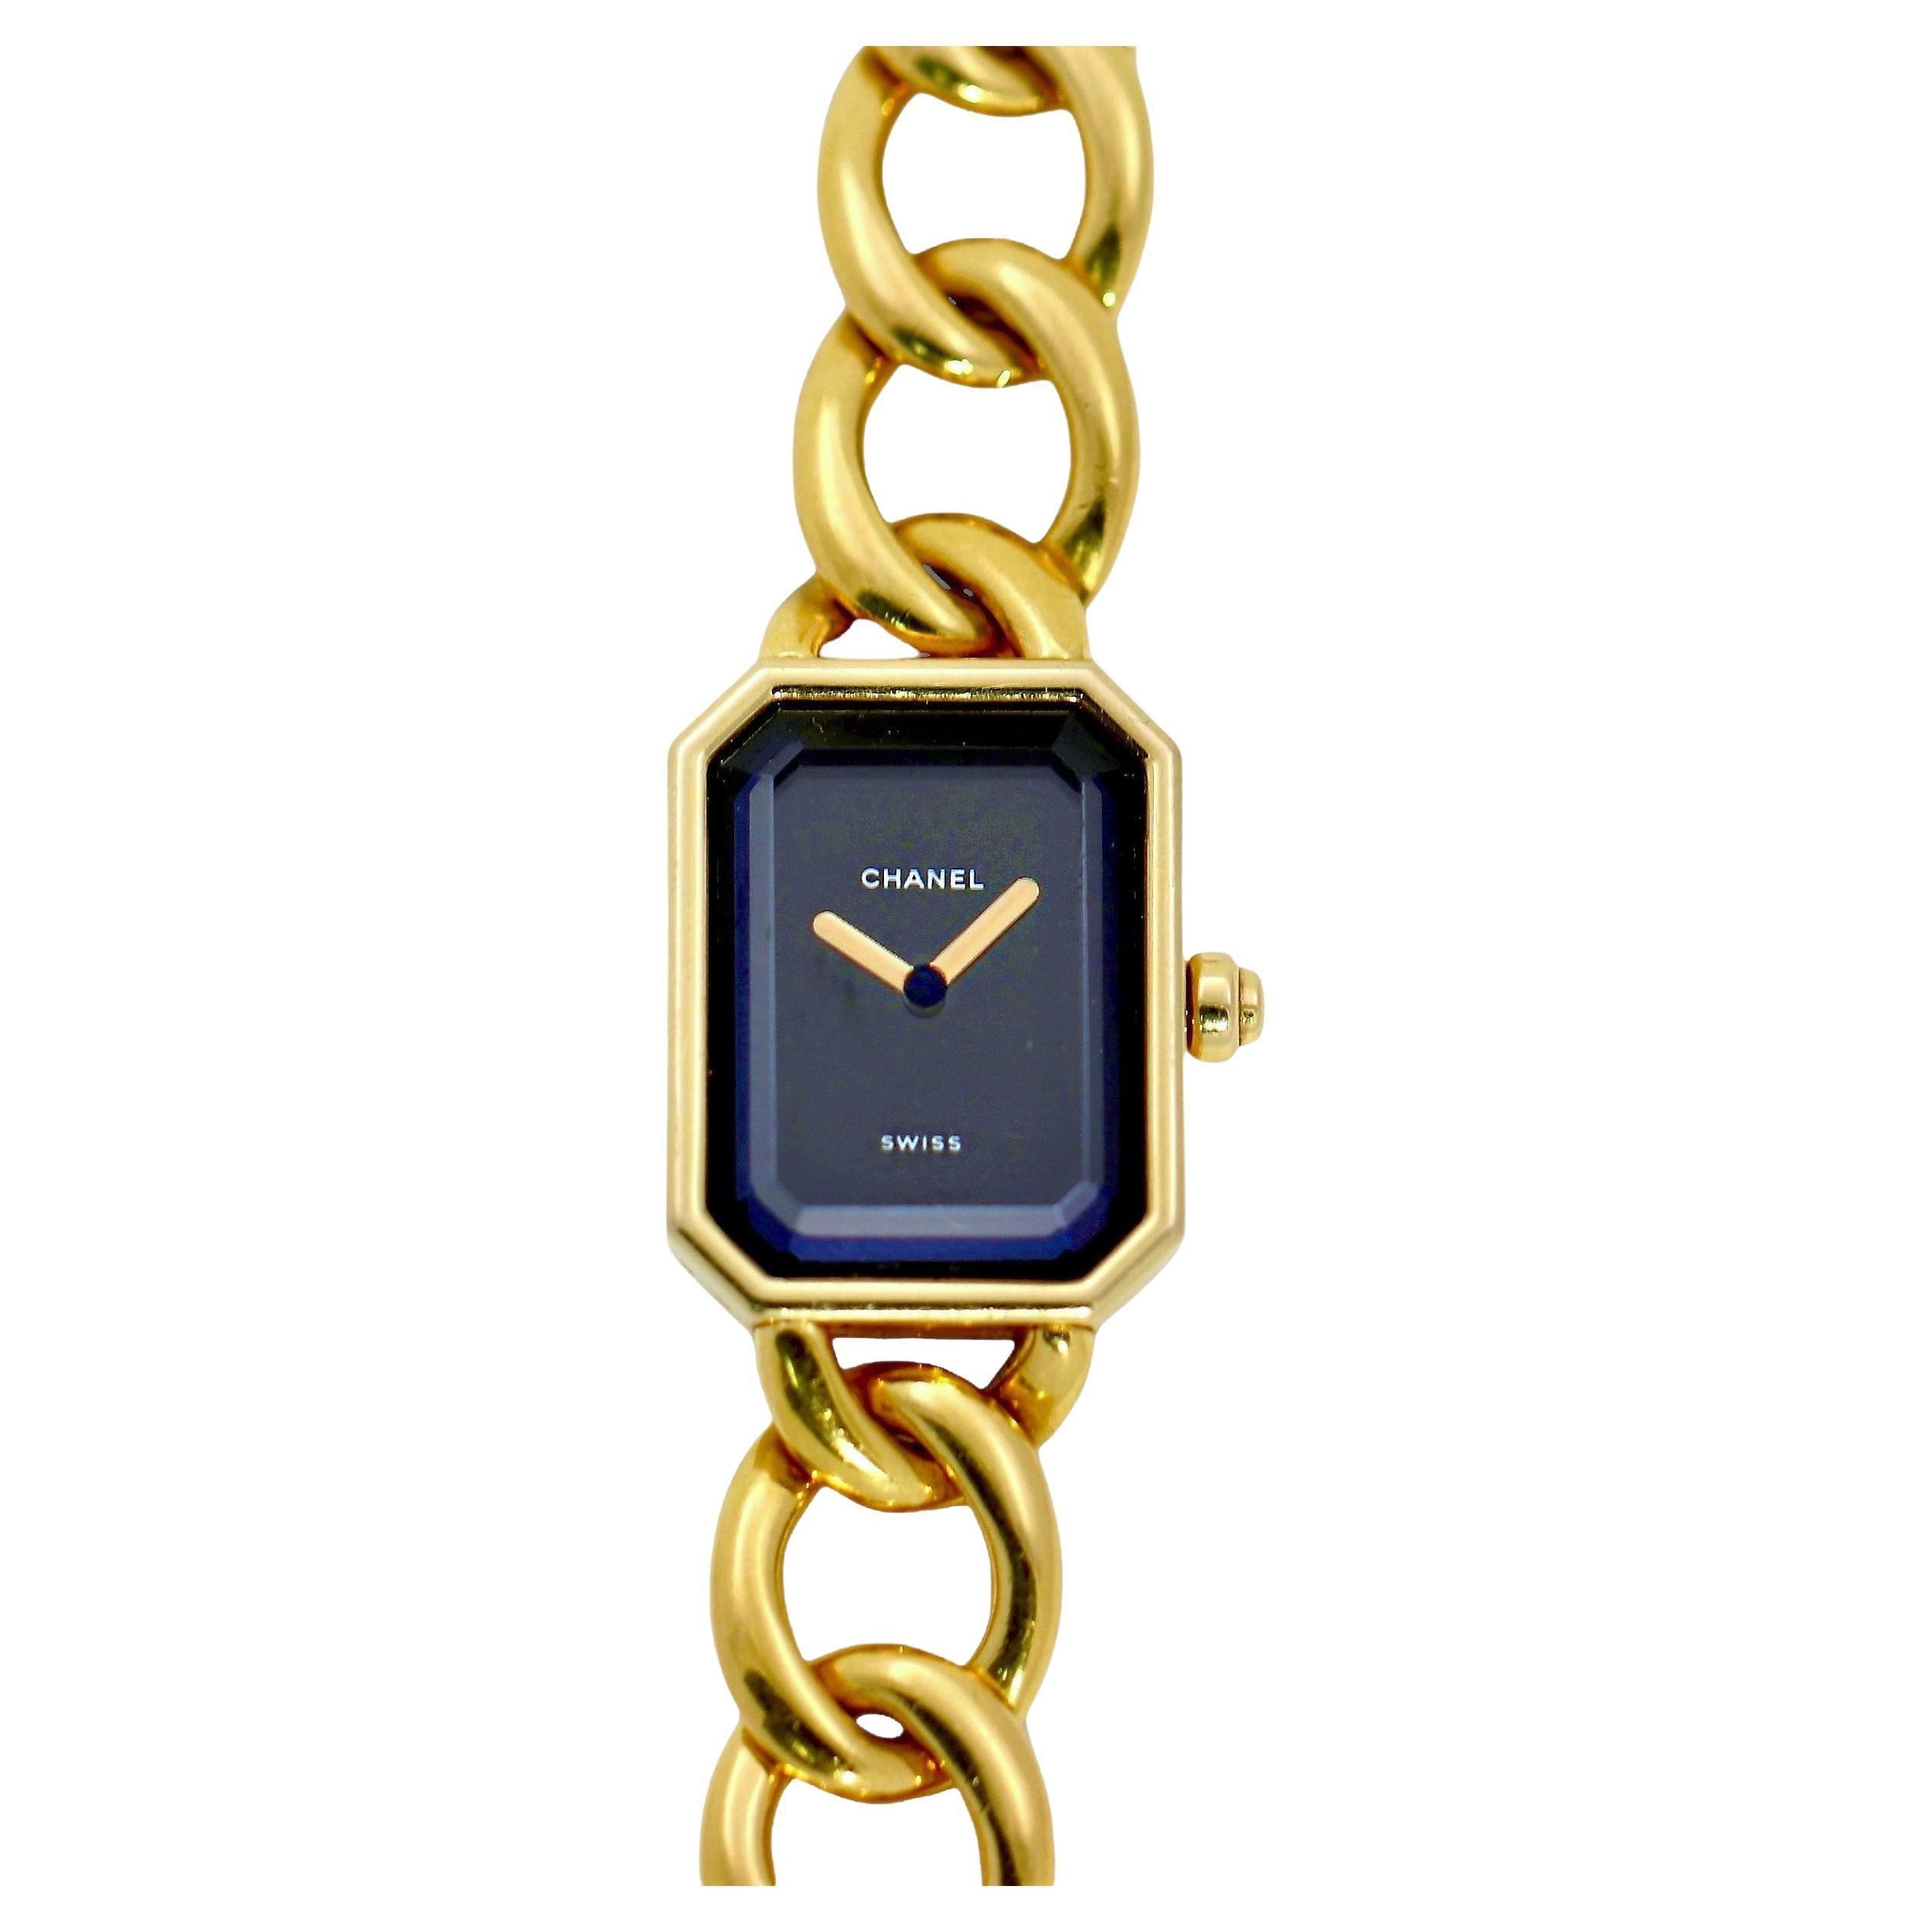 This lovely 18K yellow gold Chanel Premiere quartz ladies wrist watch was  released by the venerated house in 1987. The bold rectangular, clipped corner head measures over 1 inch in length by 3/4 inch in width. The dial is black, bears the company